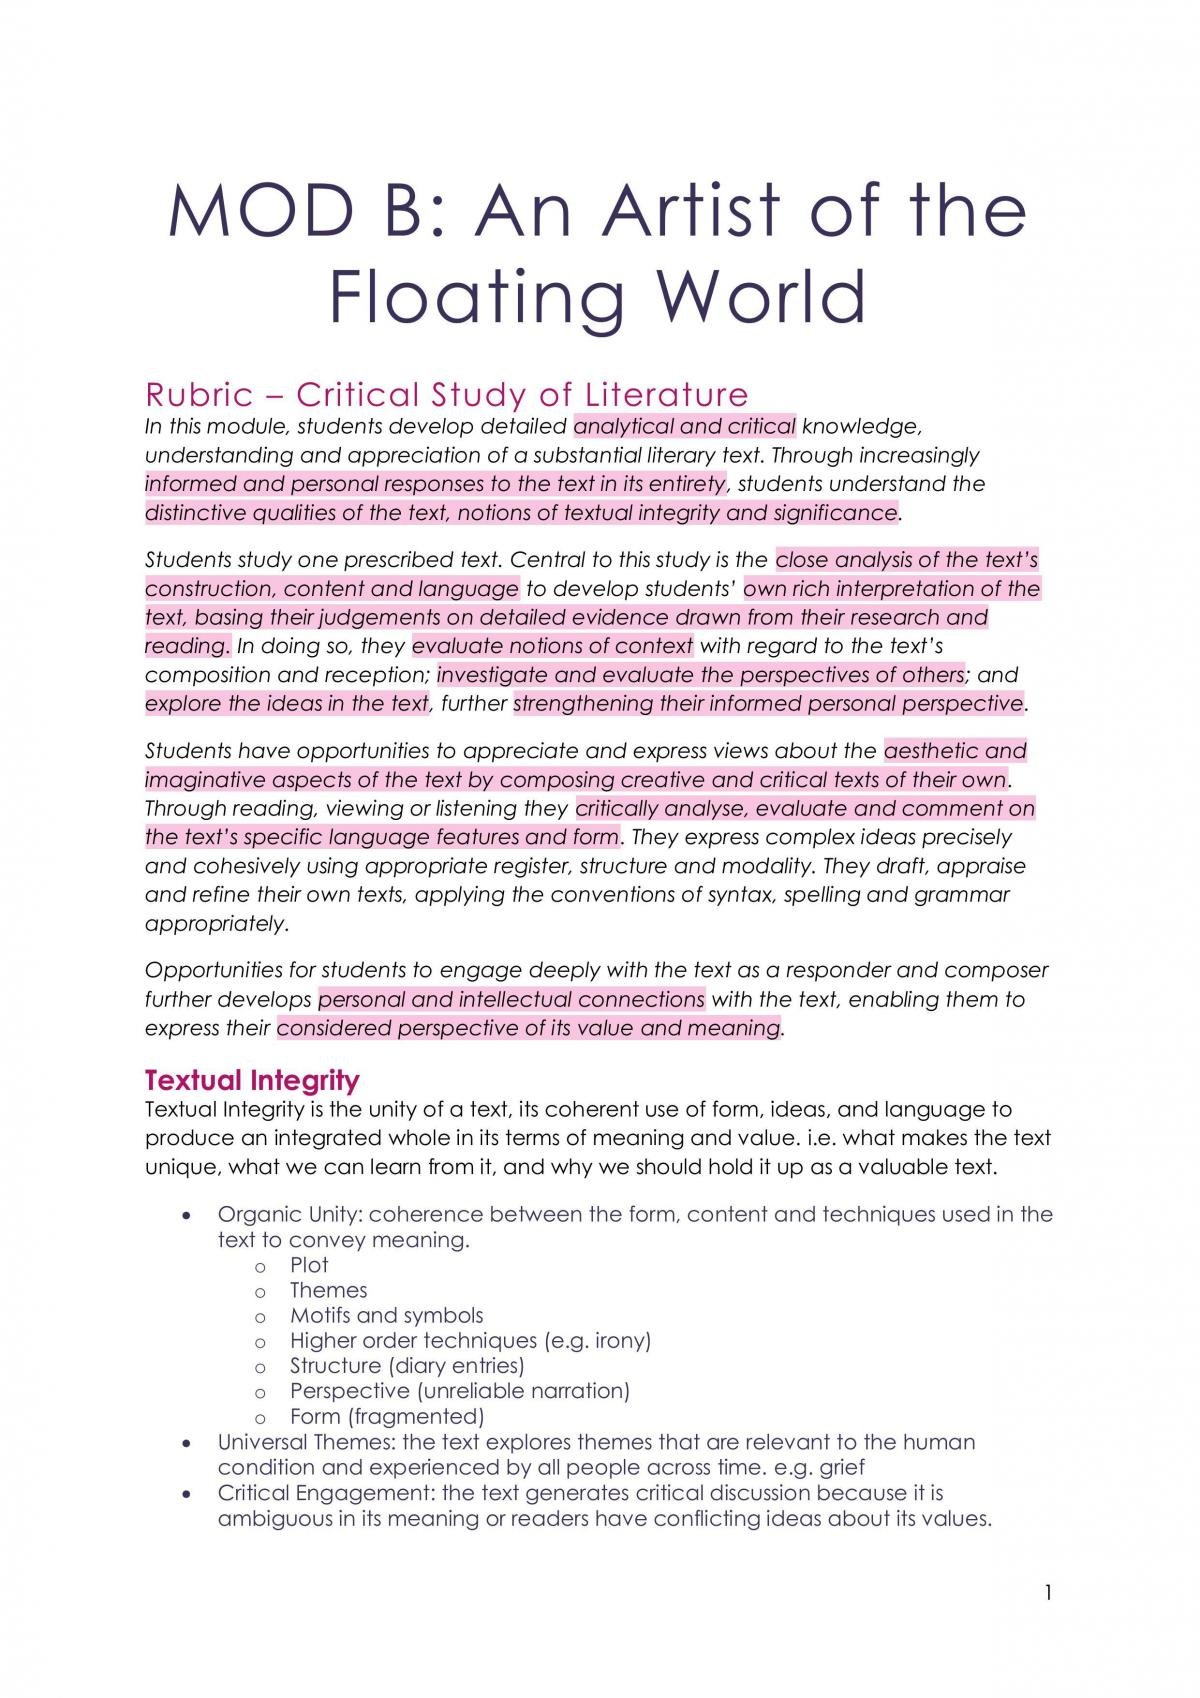 essay questions on artist of the floating world